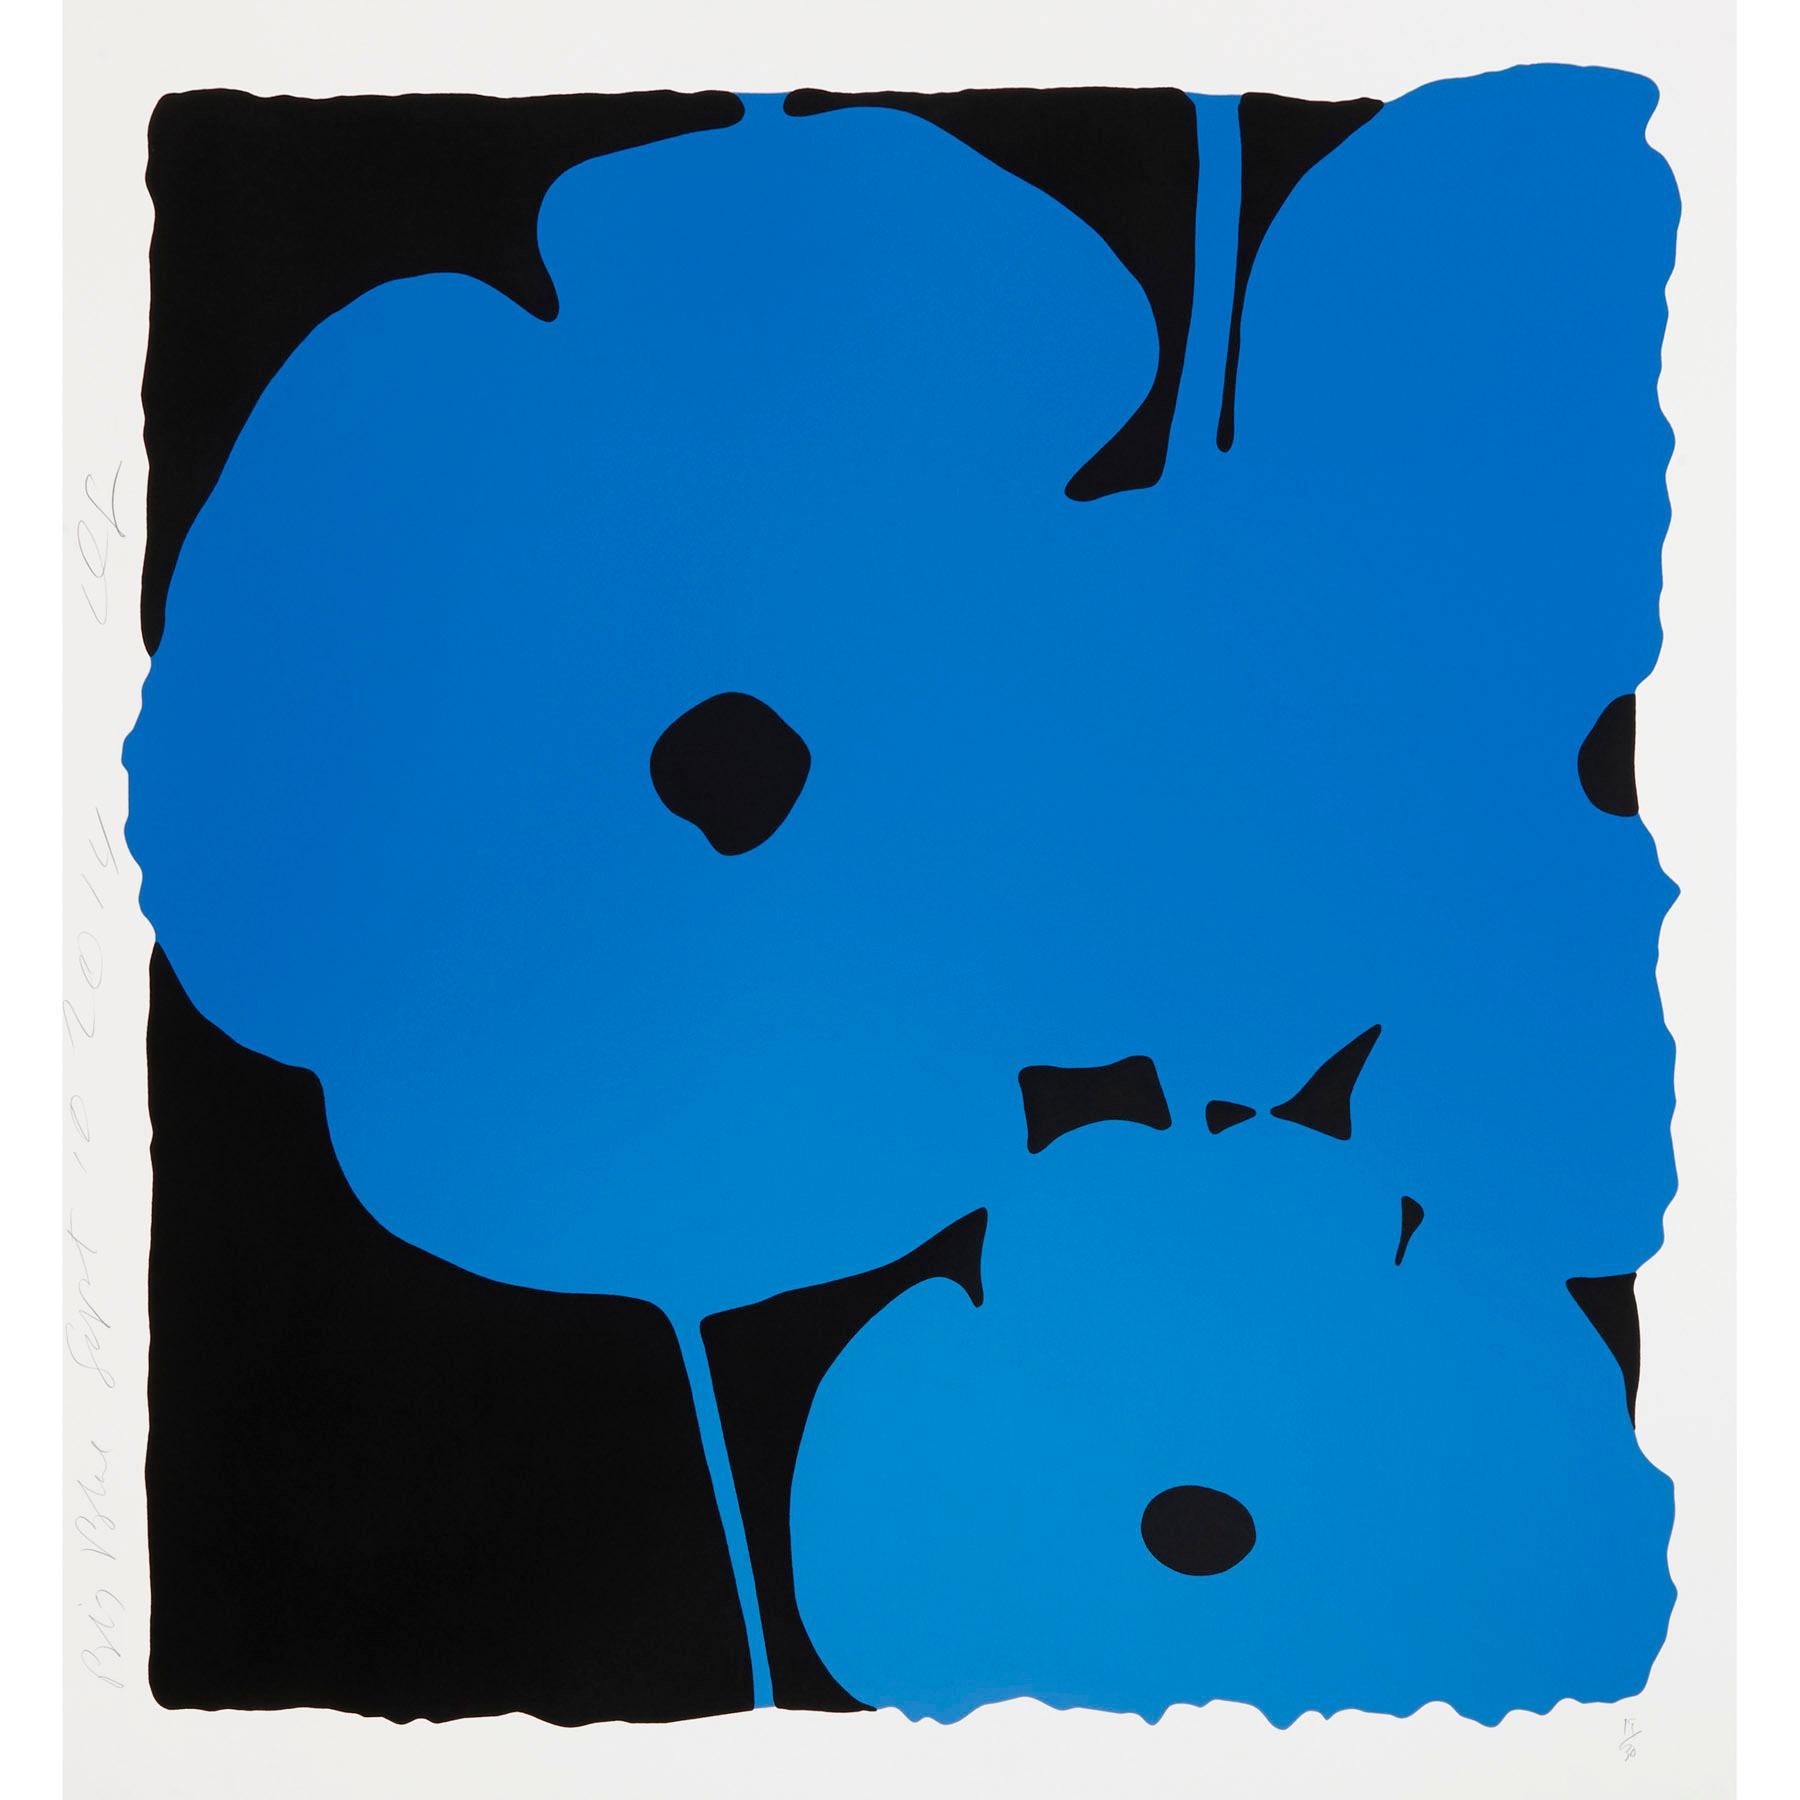 Big Poppies - Contemporary, 21st Century, Silkscreen, Poppies, Limited Edition  - Sculpture by Donald Sultan